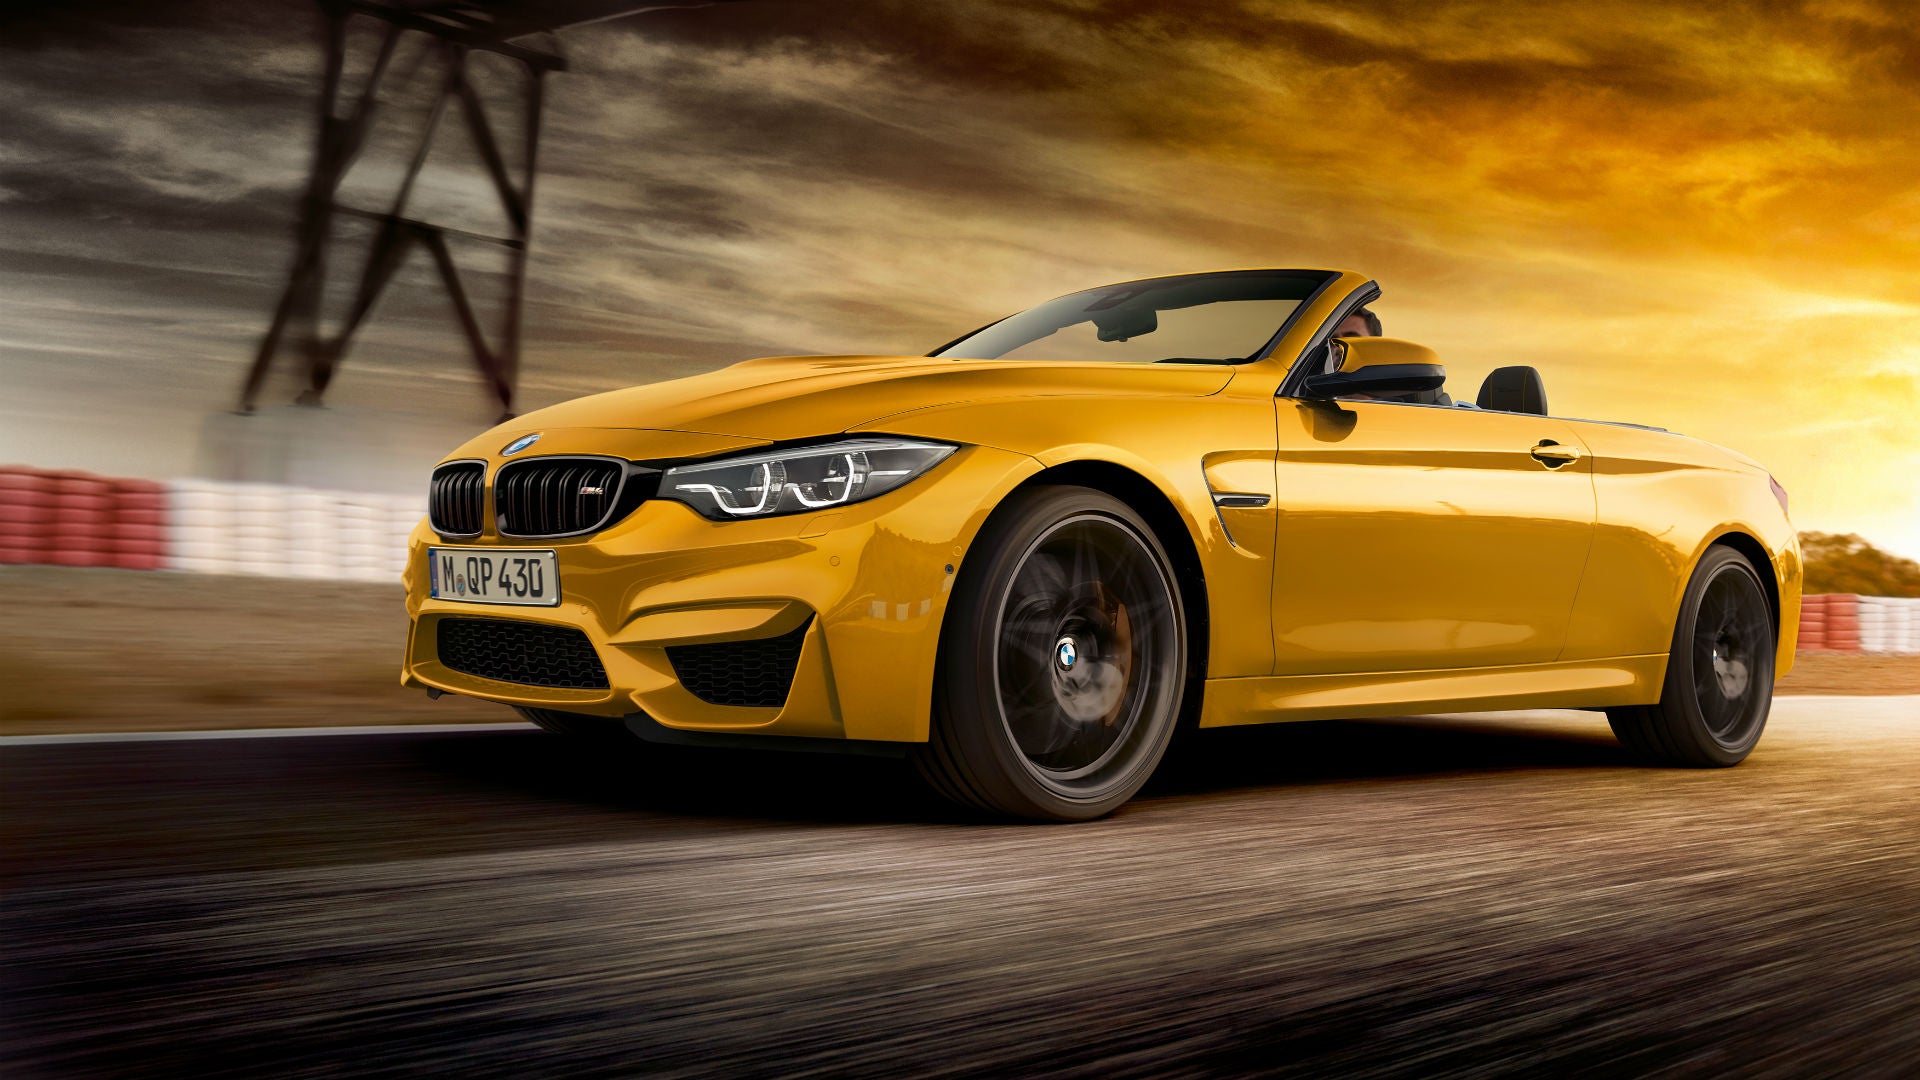 The BMW M4 Convertible 30 Jahre Edition Is an Homage to the Original M3